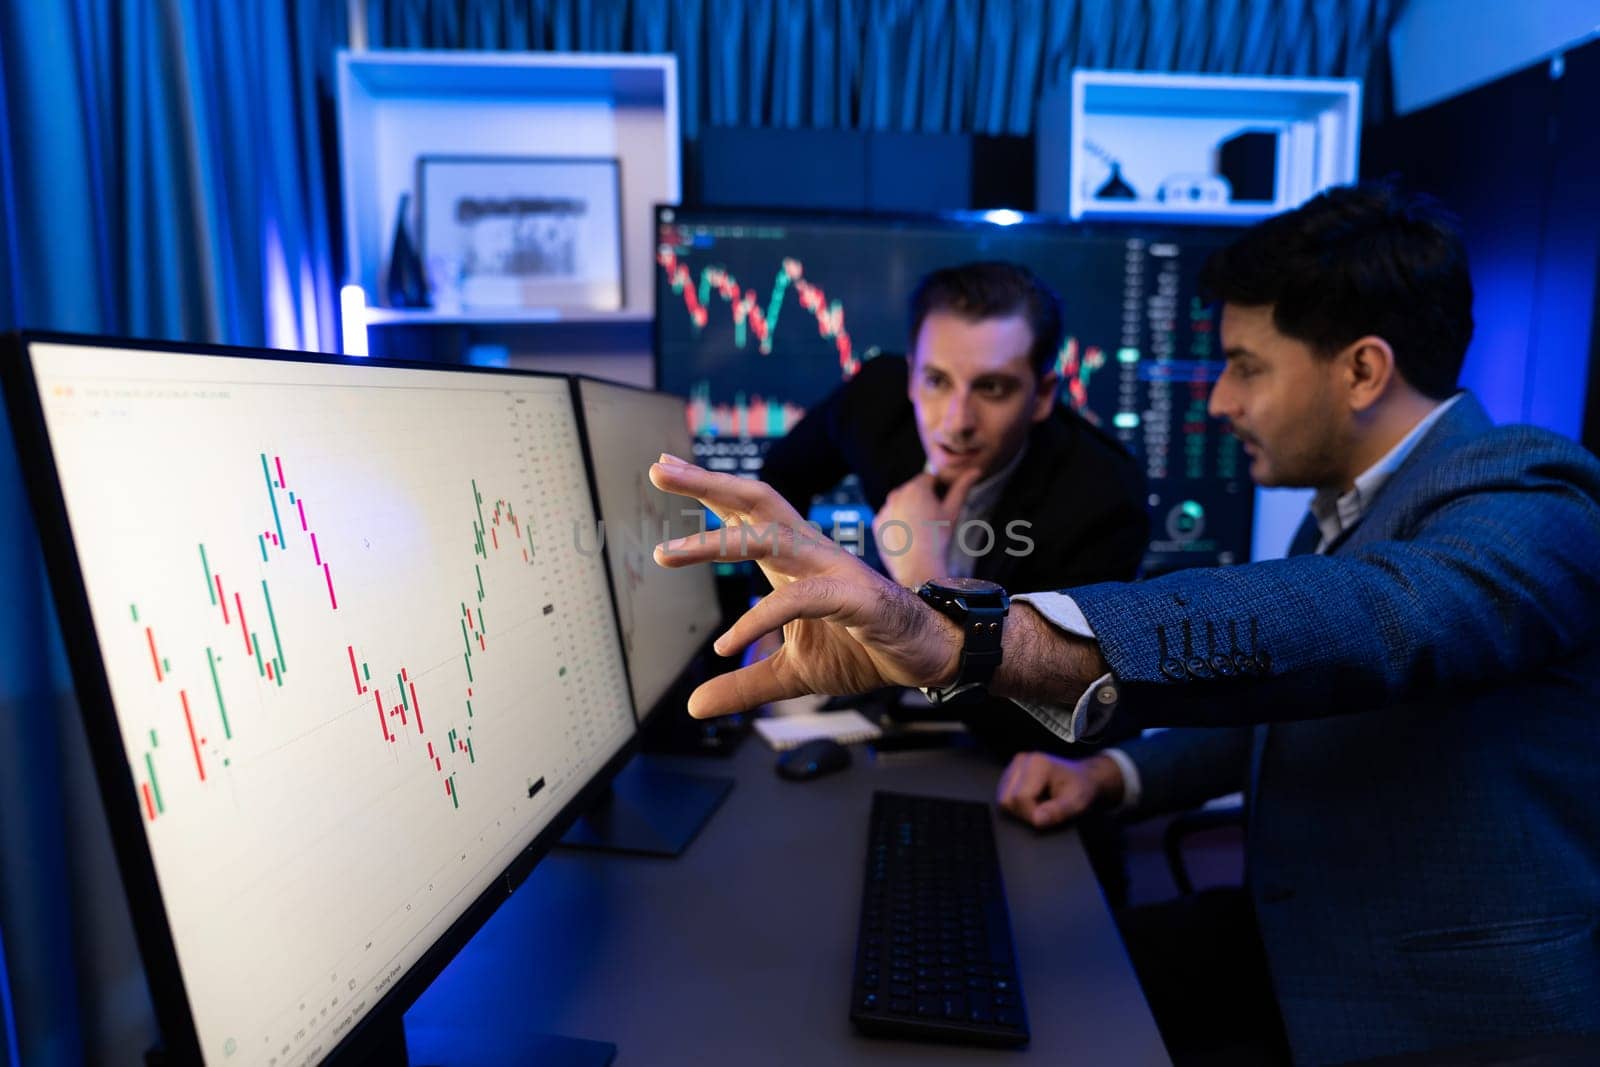 Two stock investors pointing interest market stock on monitor screen. Sellable. by biancoblue